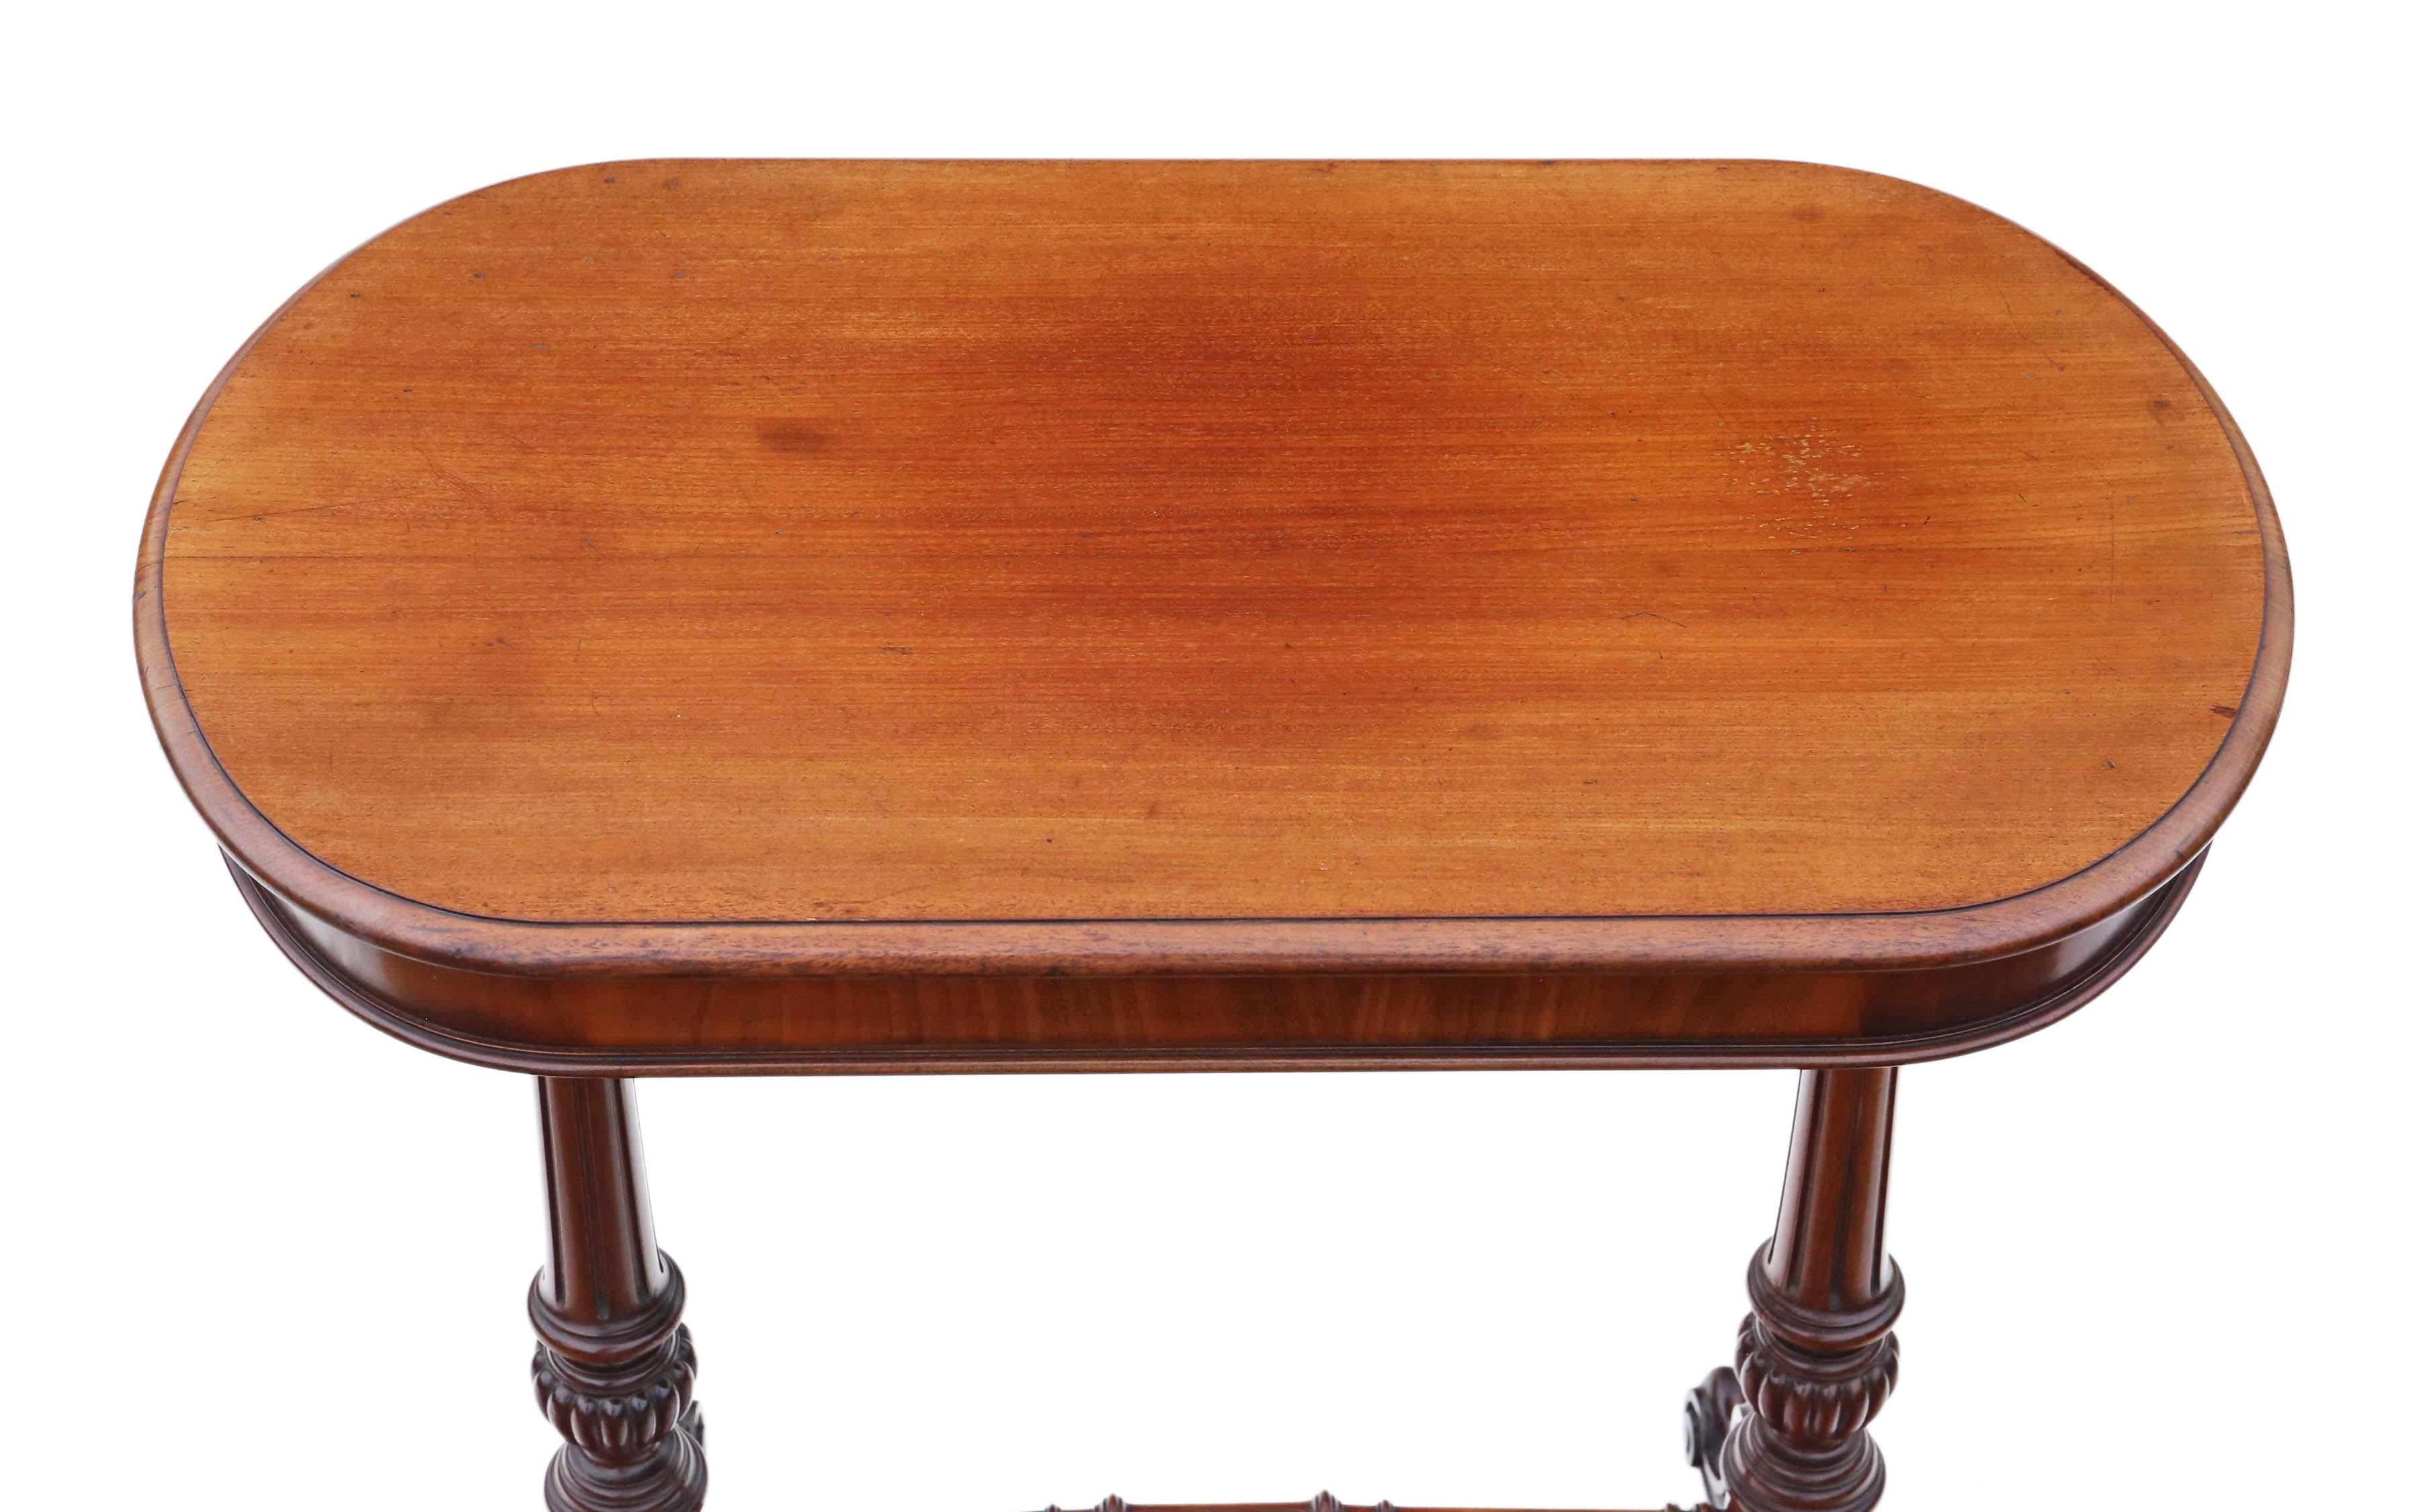 Antique quality mahogany occasional side centre window stretcher writing table C1880 .

No loose joints and no woodworm. A rare decorative find, having an attractive carved stretcher base.

Would look great in the right location!

Overall